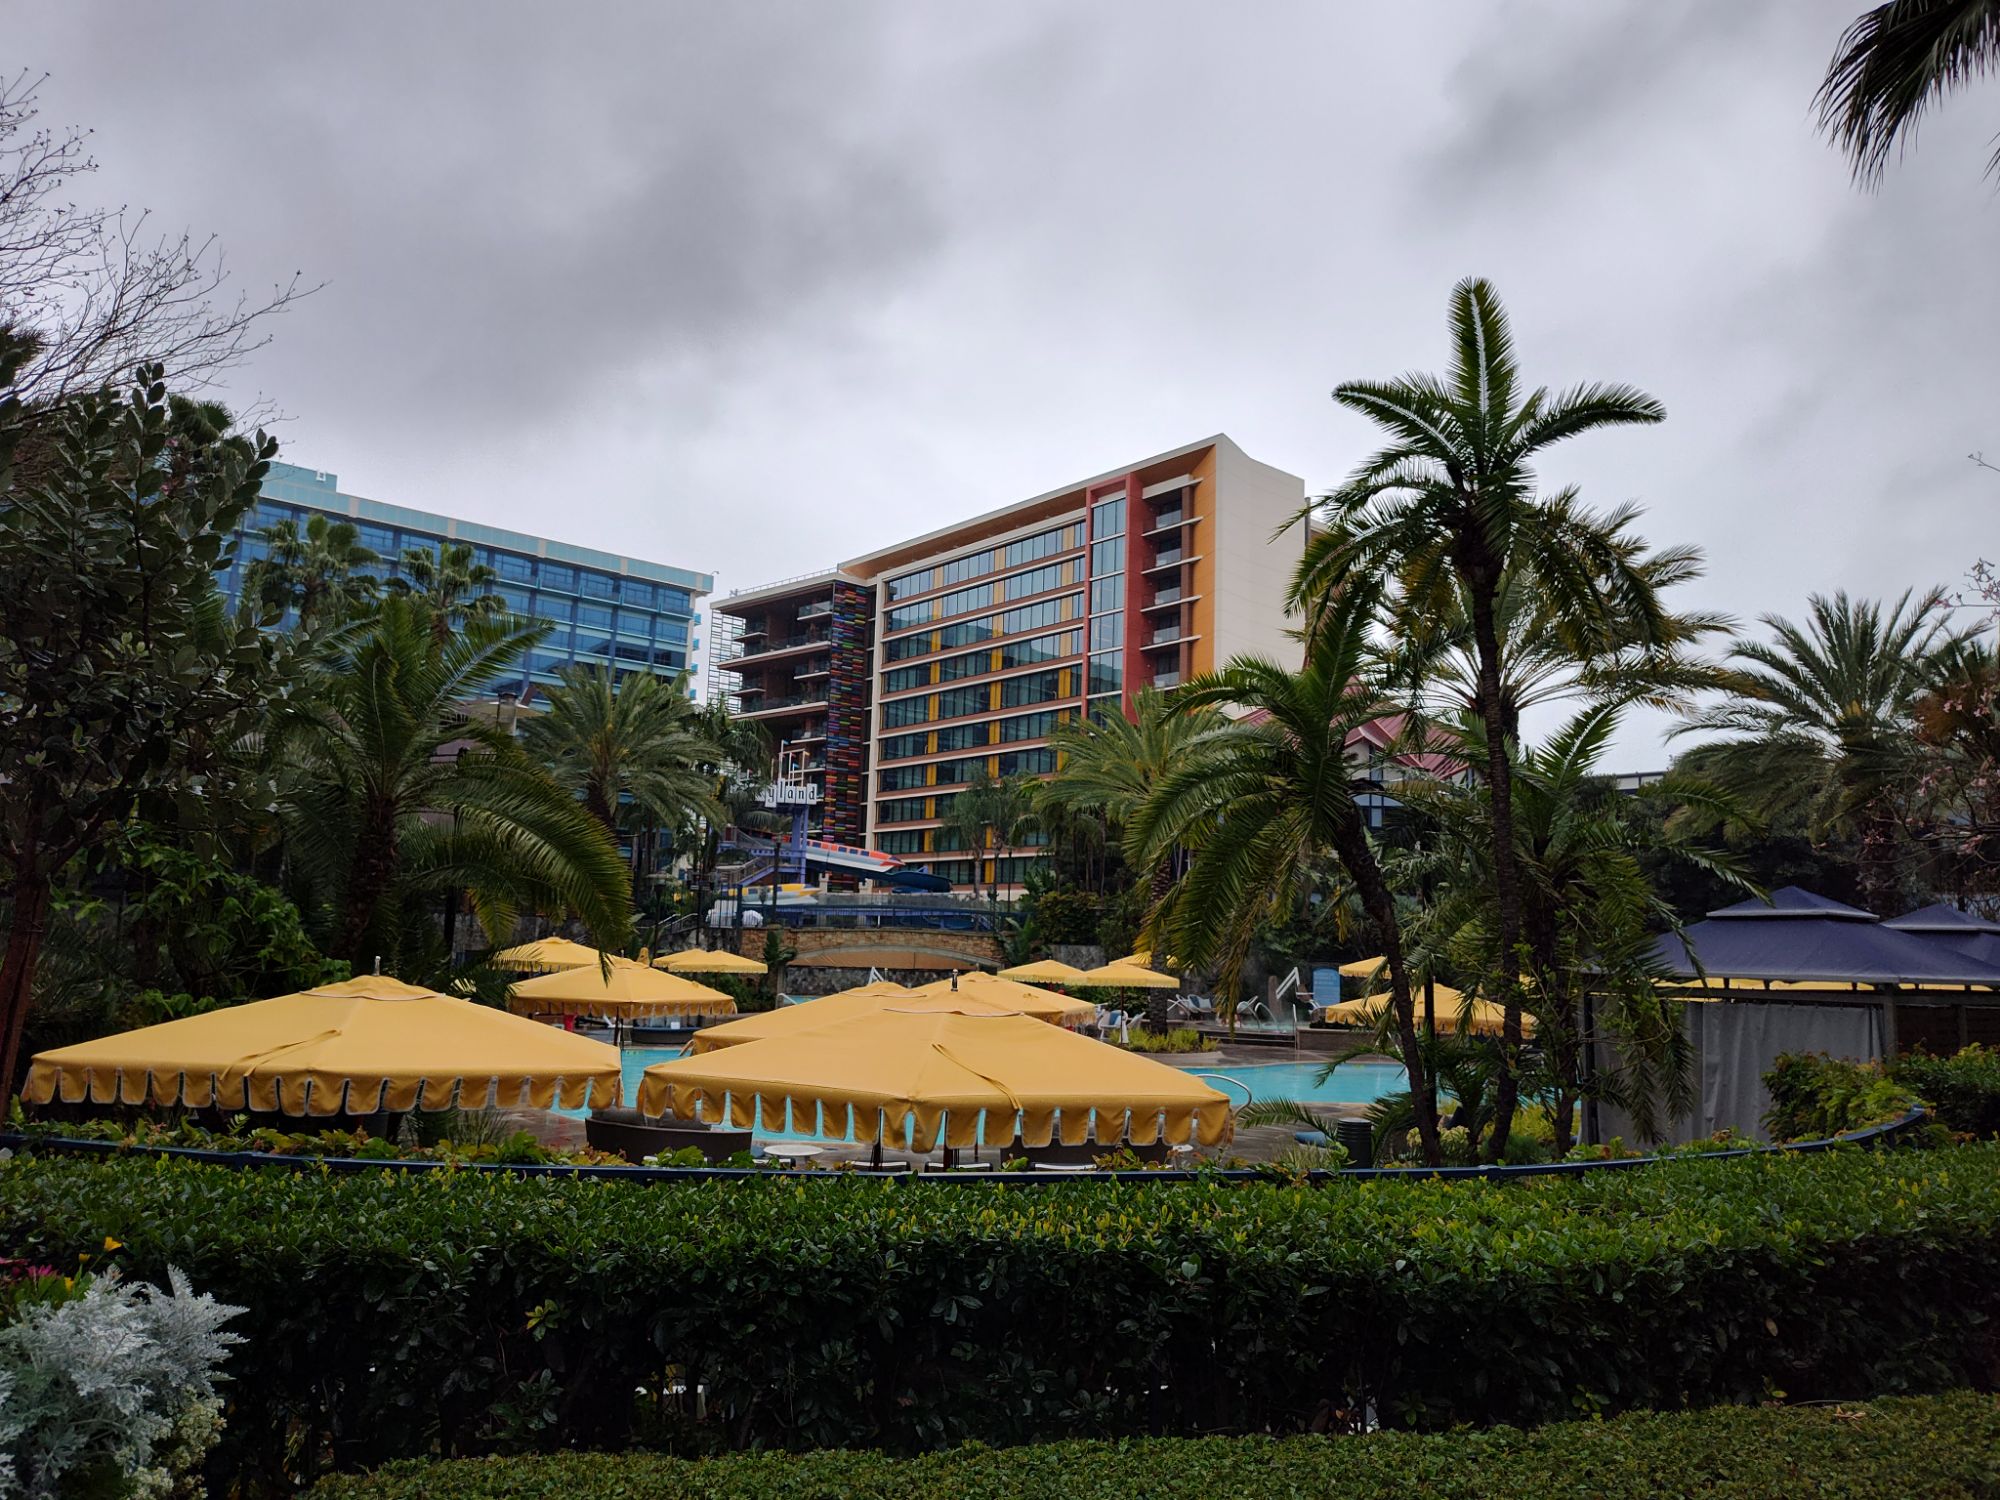 The resort is beautiful, but there's not too many people outside because it's rather cloudy and threatening to pour down rain.